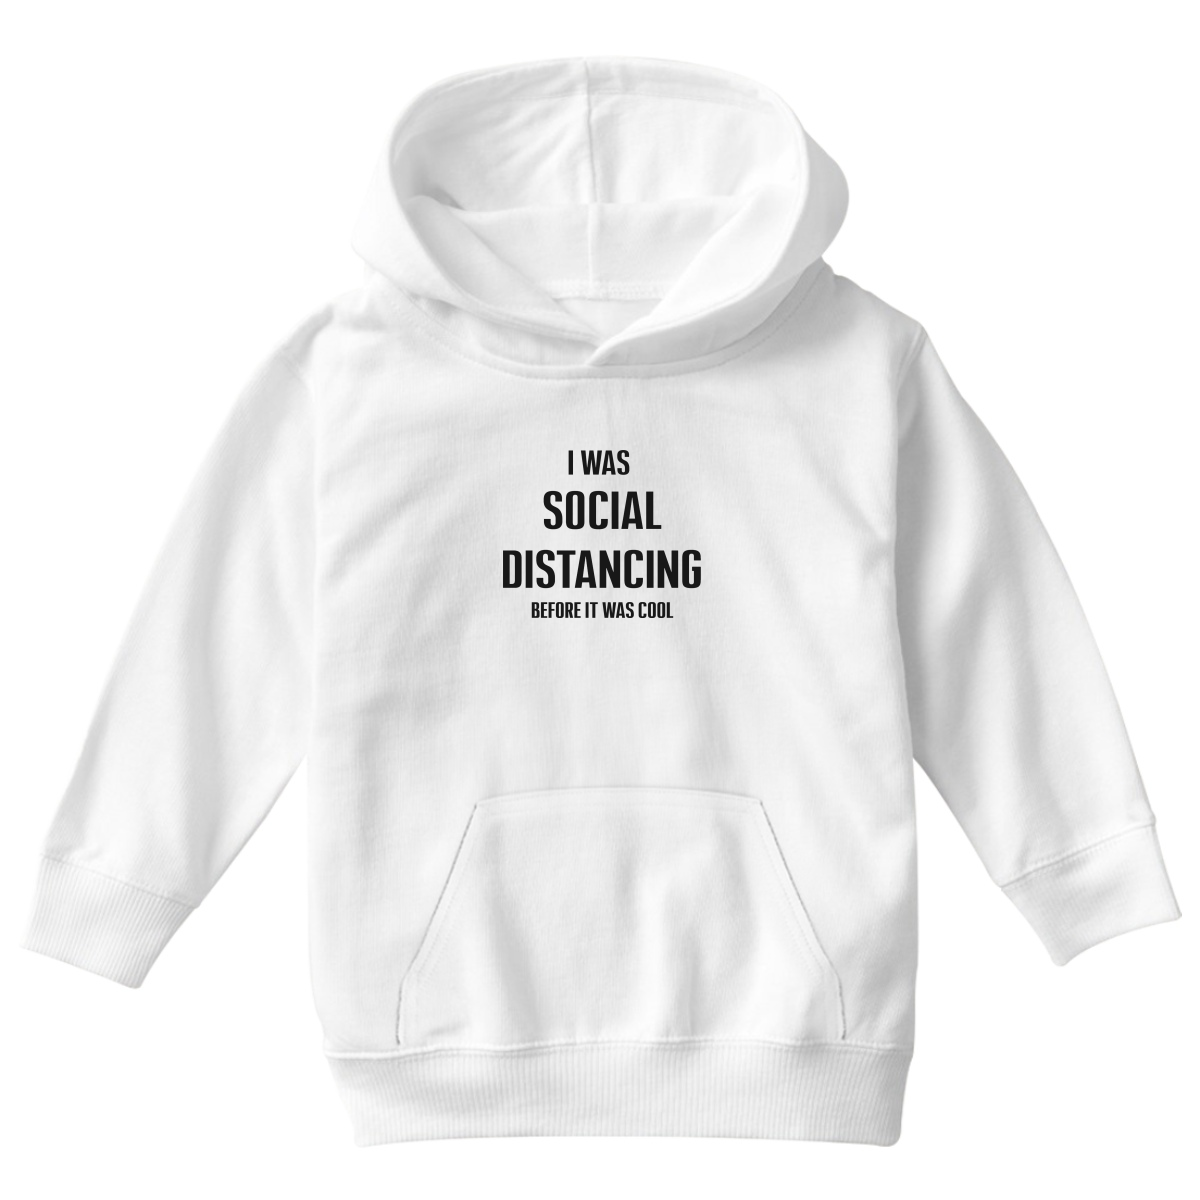 I was social distancing before it was cool Kids Hoodie | White